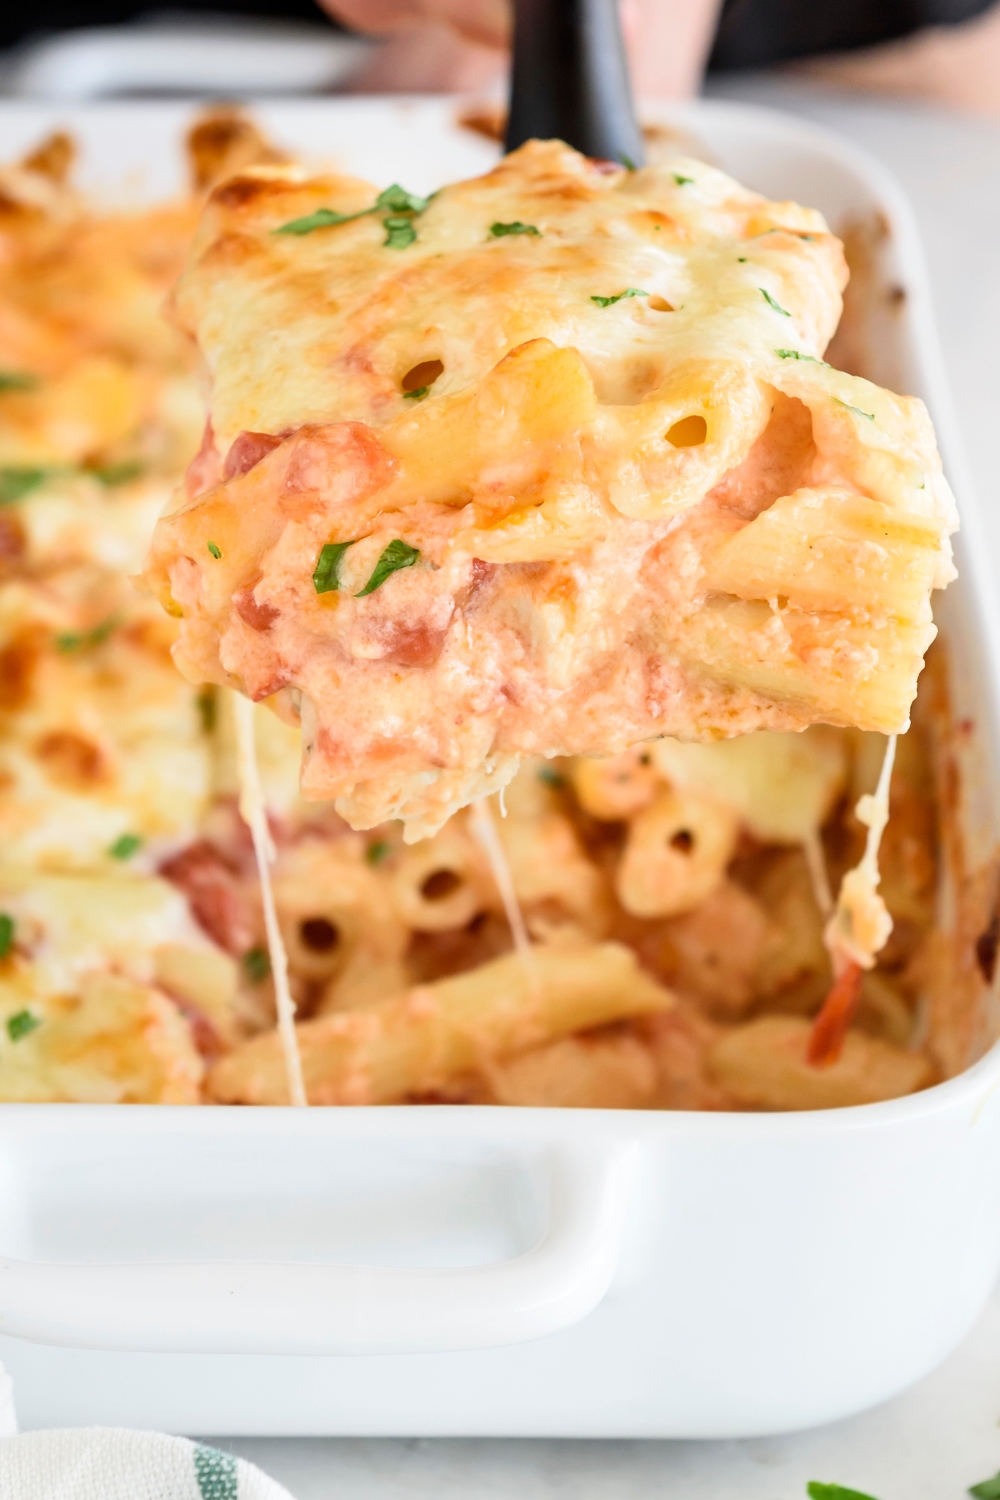 Close up of a scoop of baked pasta coated in a creamy tomato sauce with melted cheese.